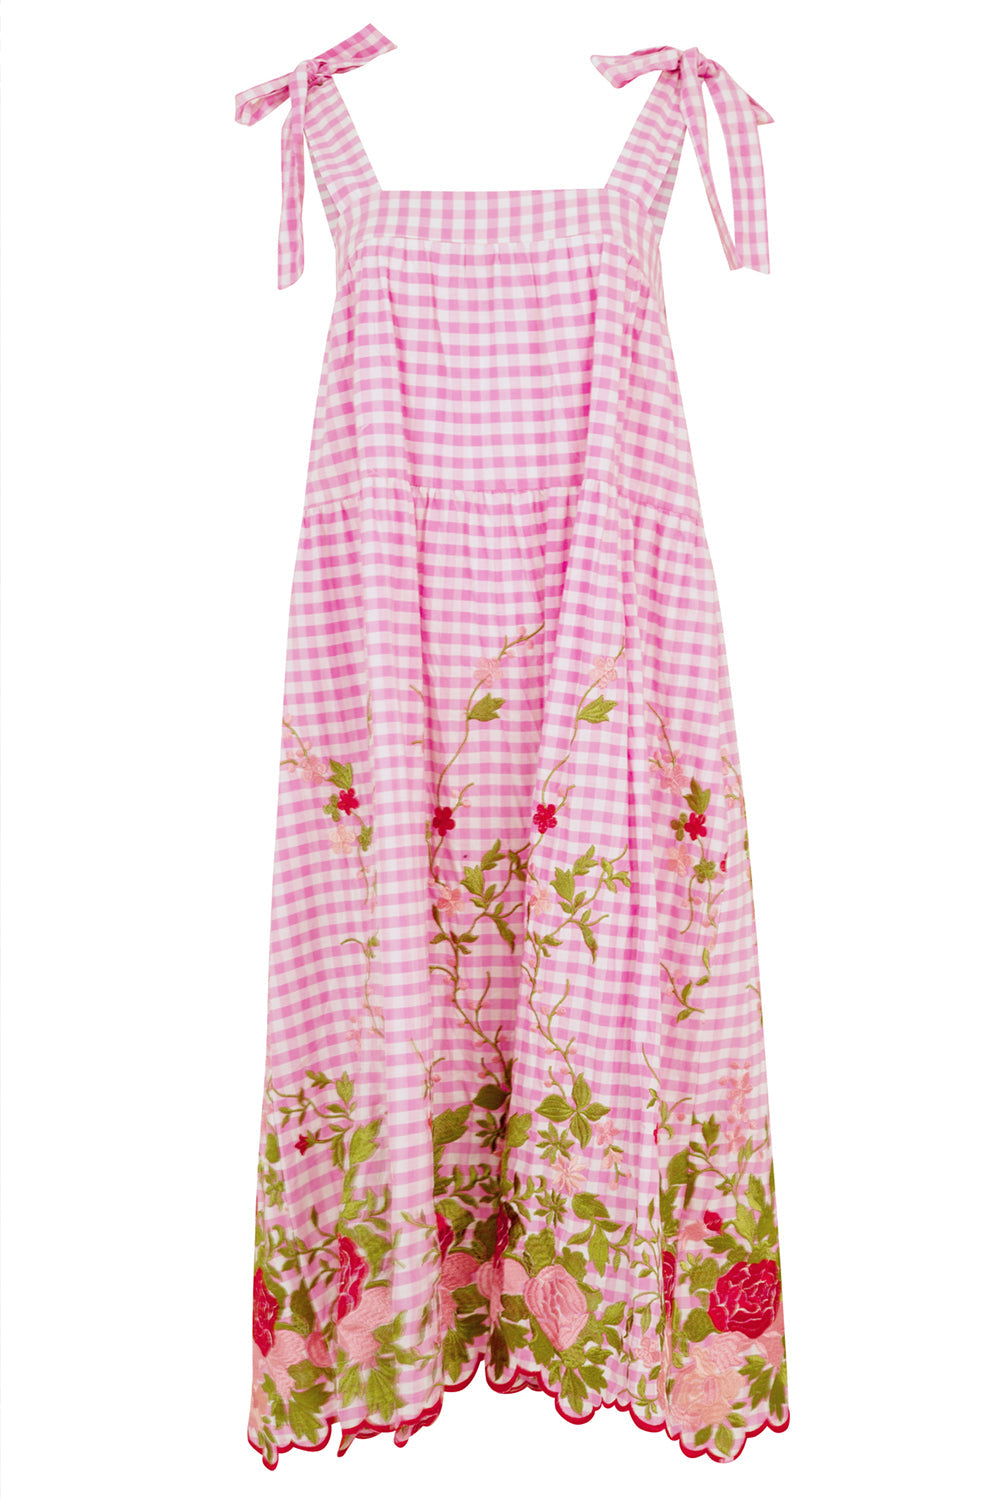 CURATE STRAP HAPPY DRESS - PINK CHECK